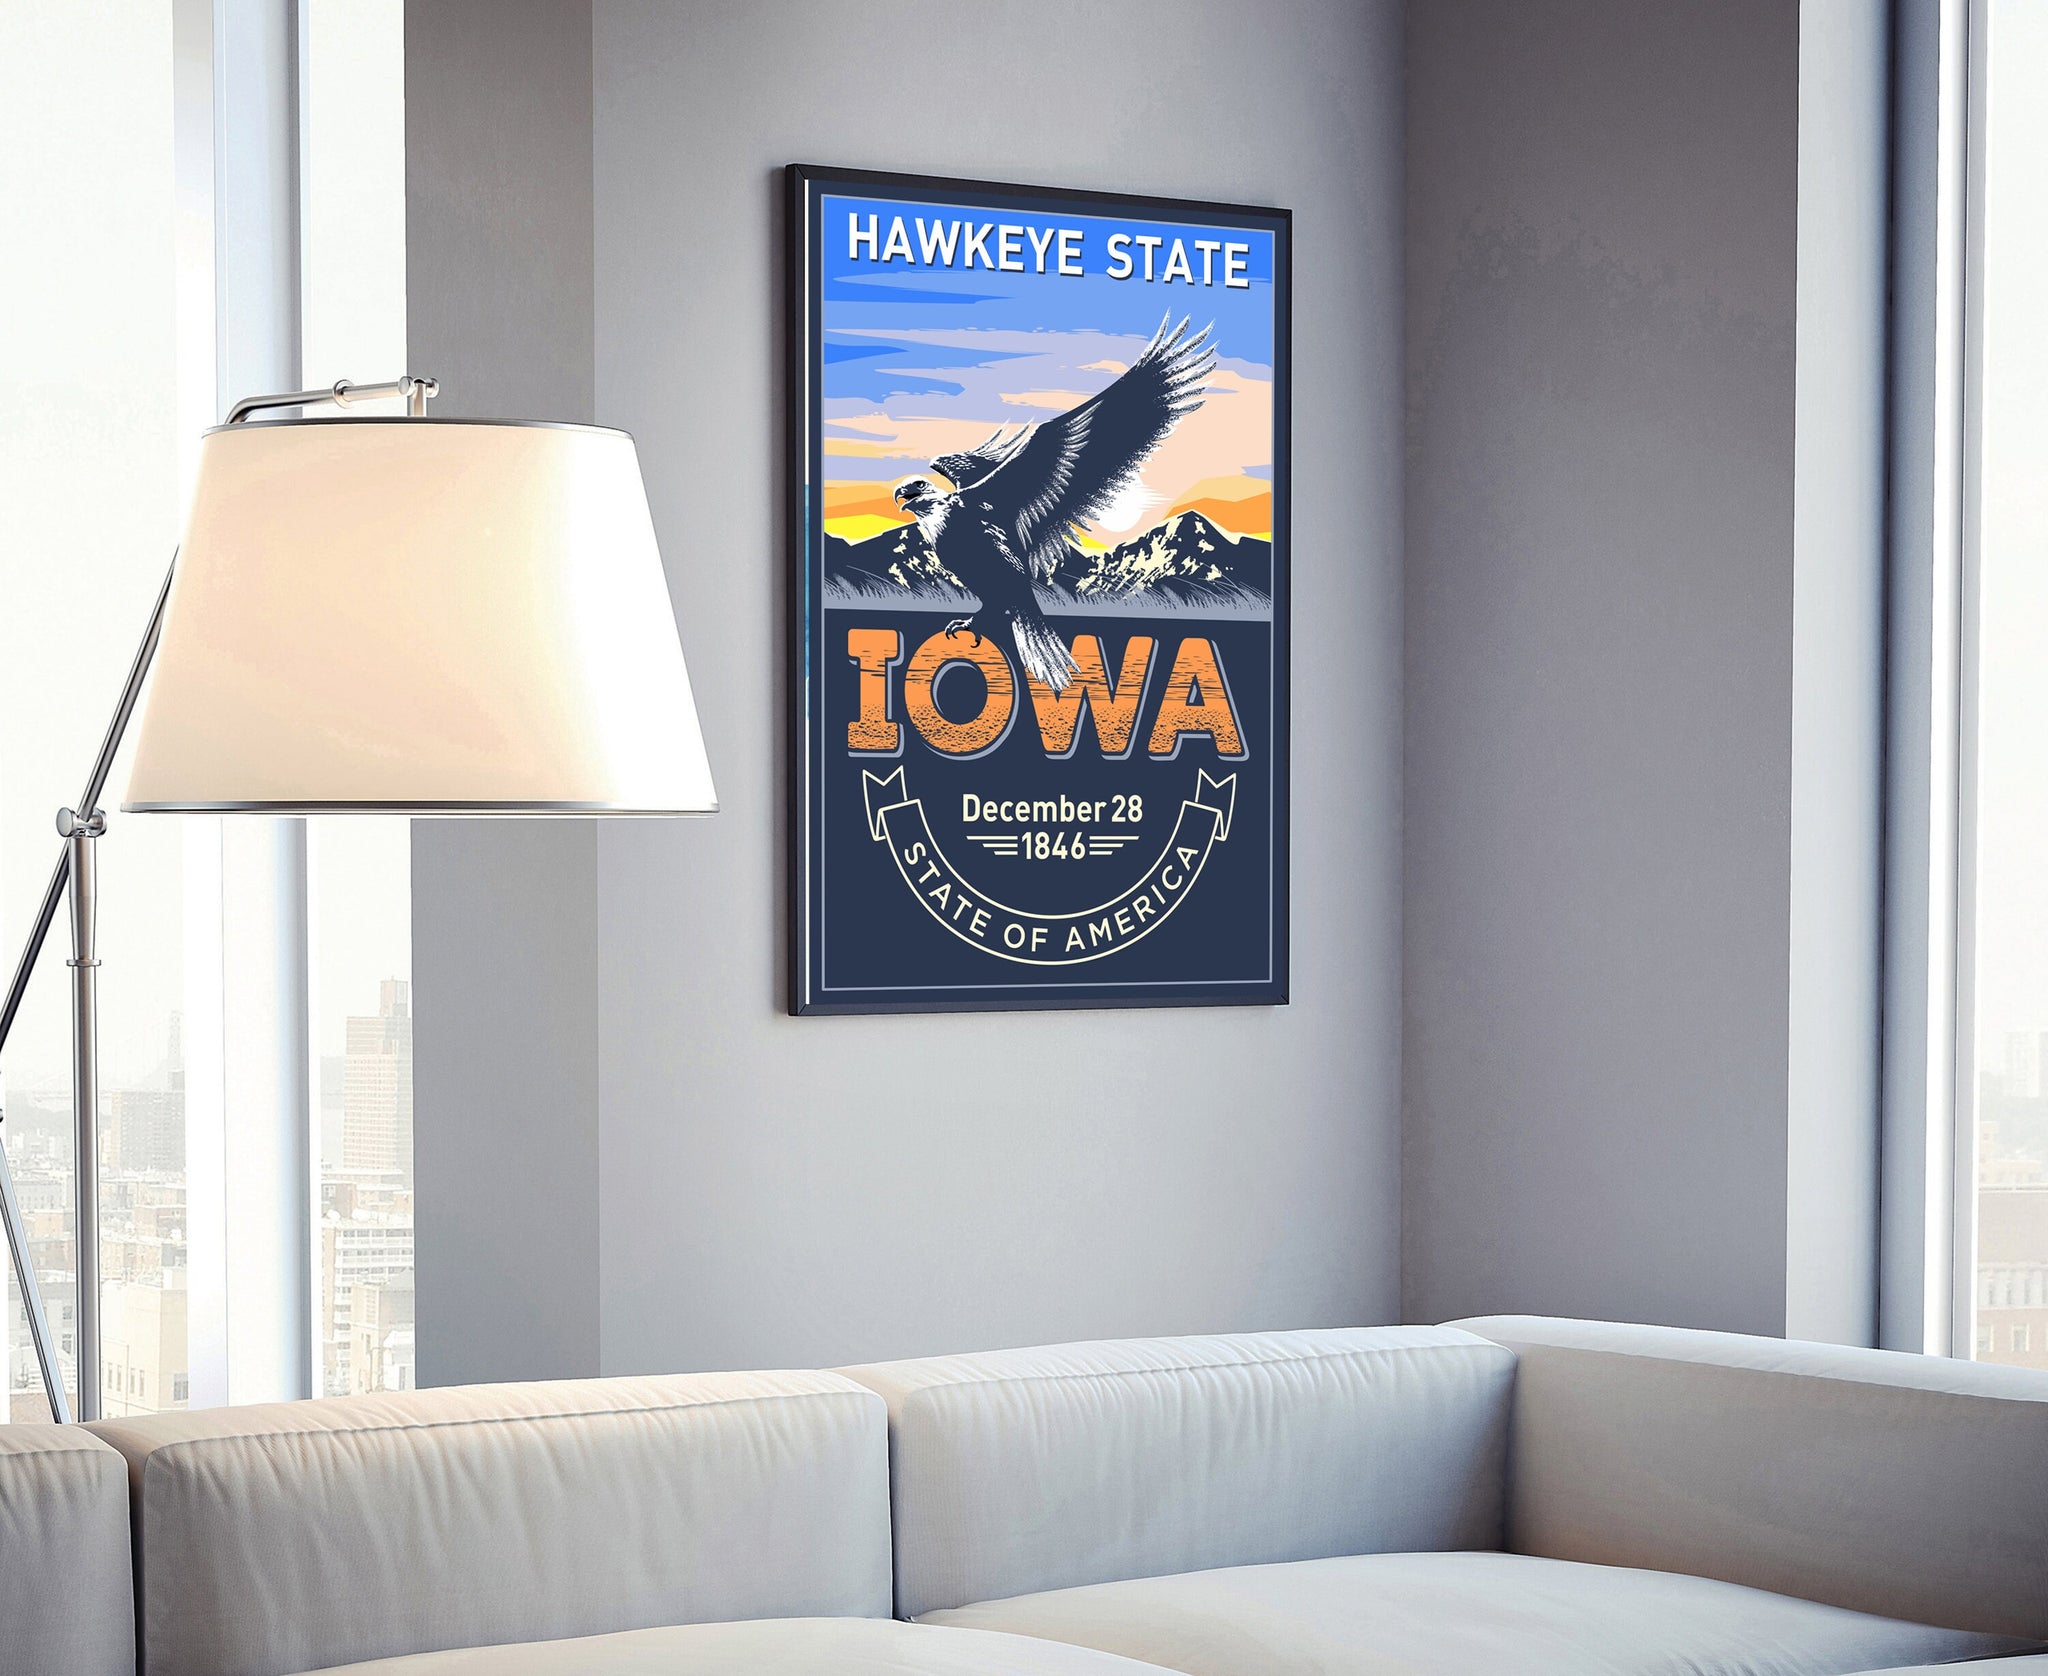 United States Iowa State Poster, Iowa Poster Print, Iowa State Emblem Poster, Retro Travel State Poster, Home Wall Art, Office Wall Art